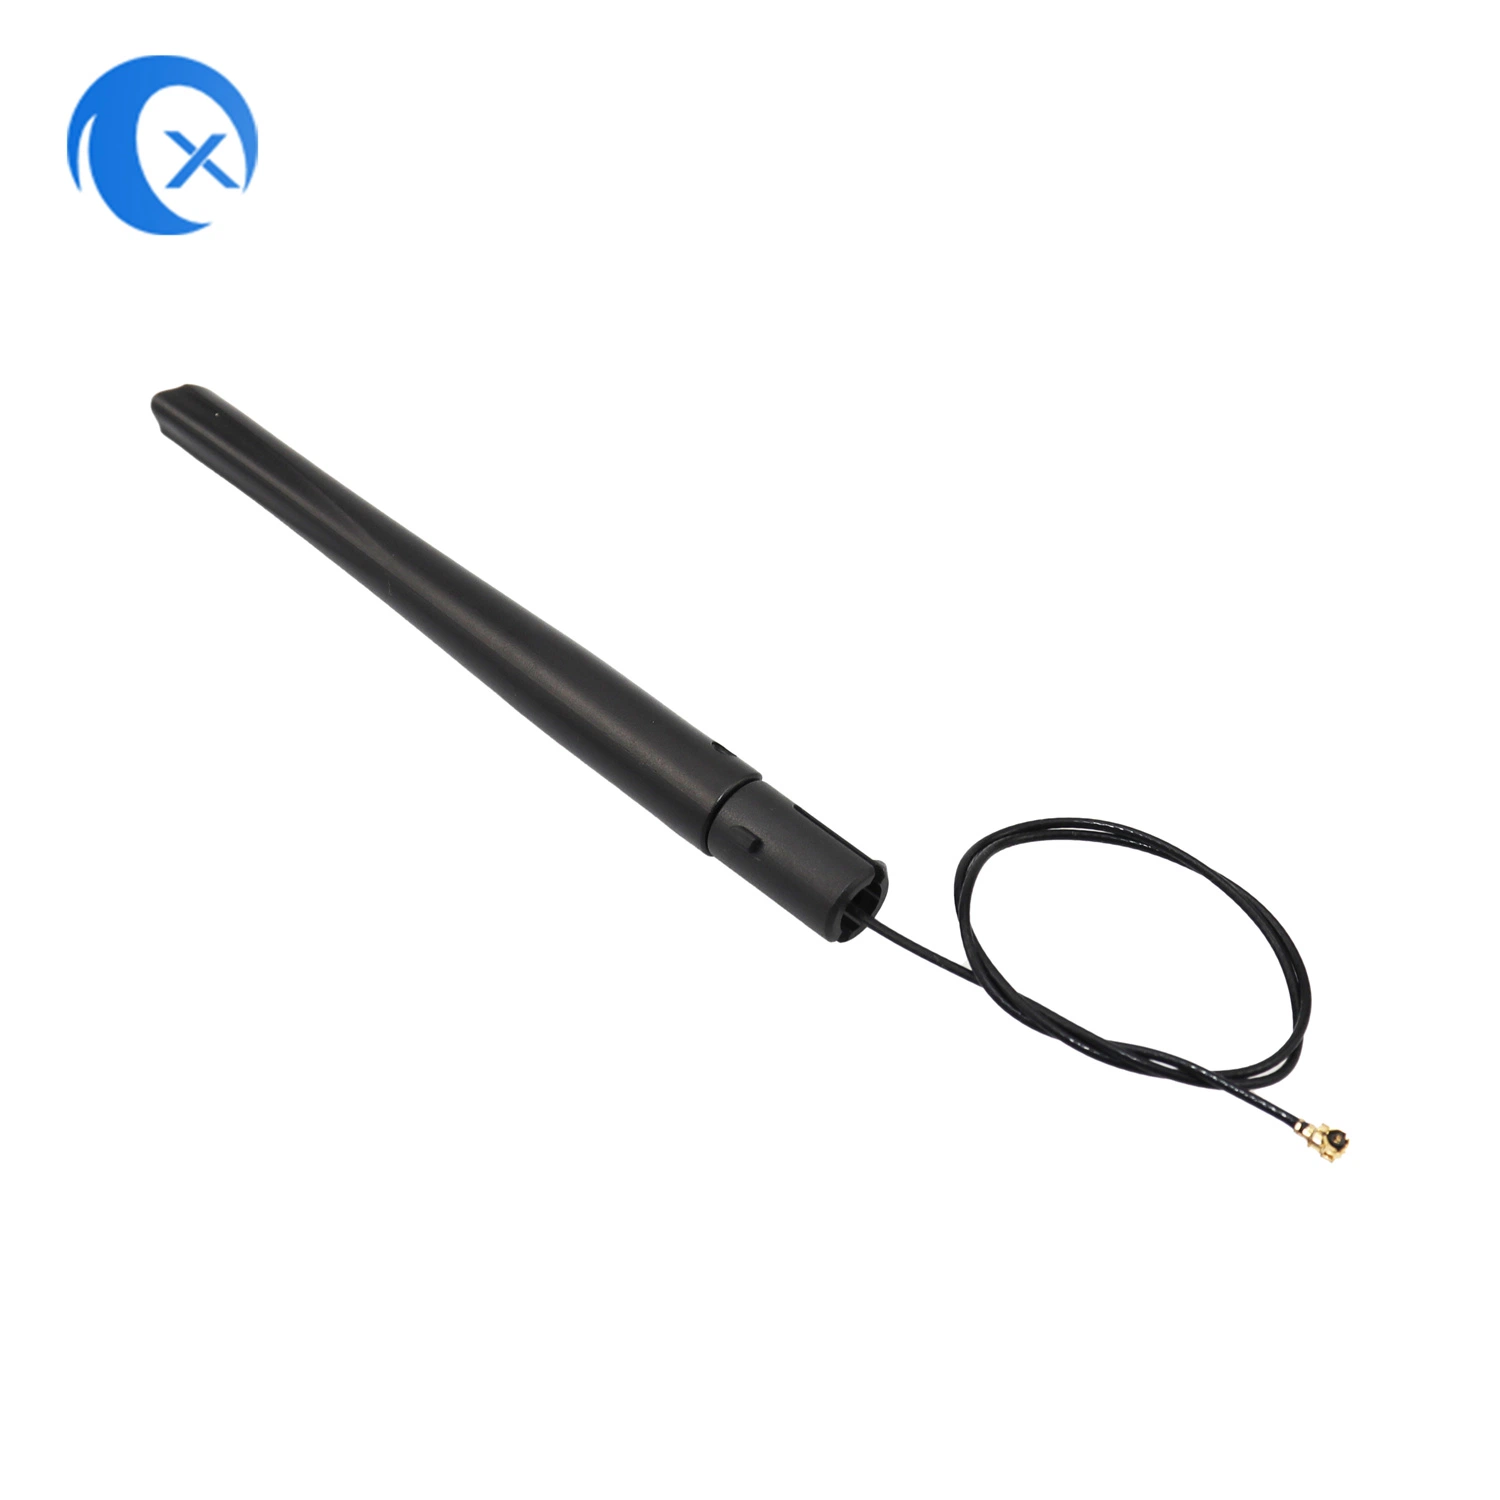 2.4G 2dBi Swivel WiFi Antenna with Flying Wire Ufl Ipex Connector for Security Camera Antenna